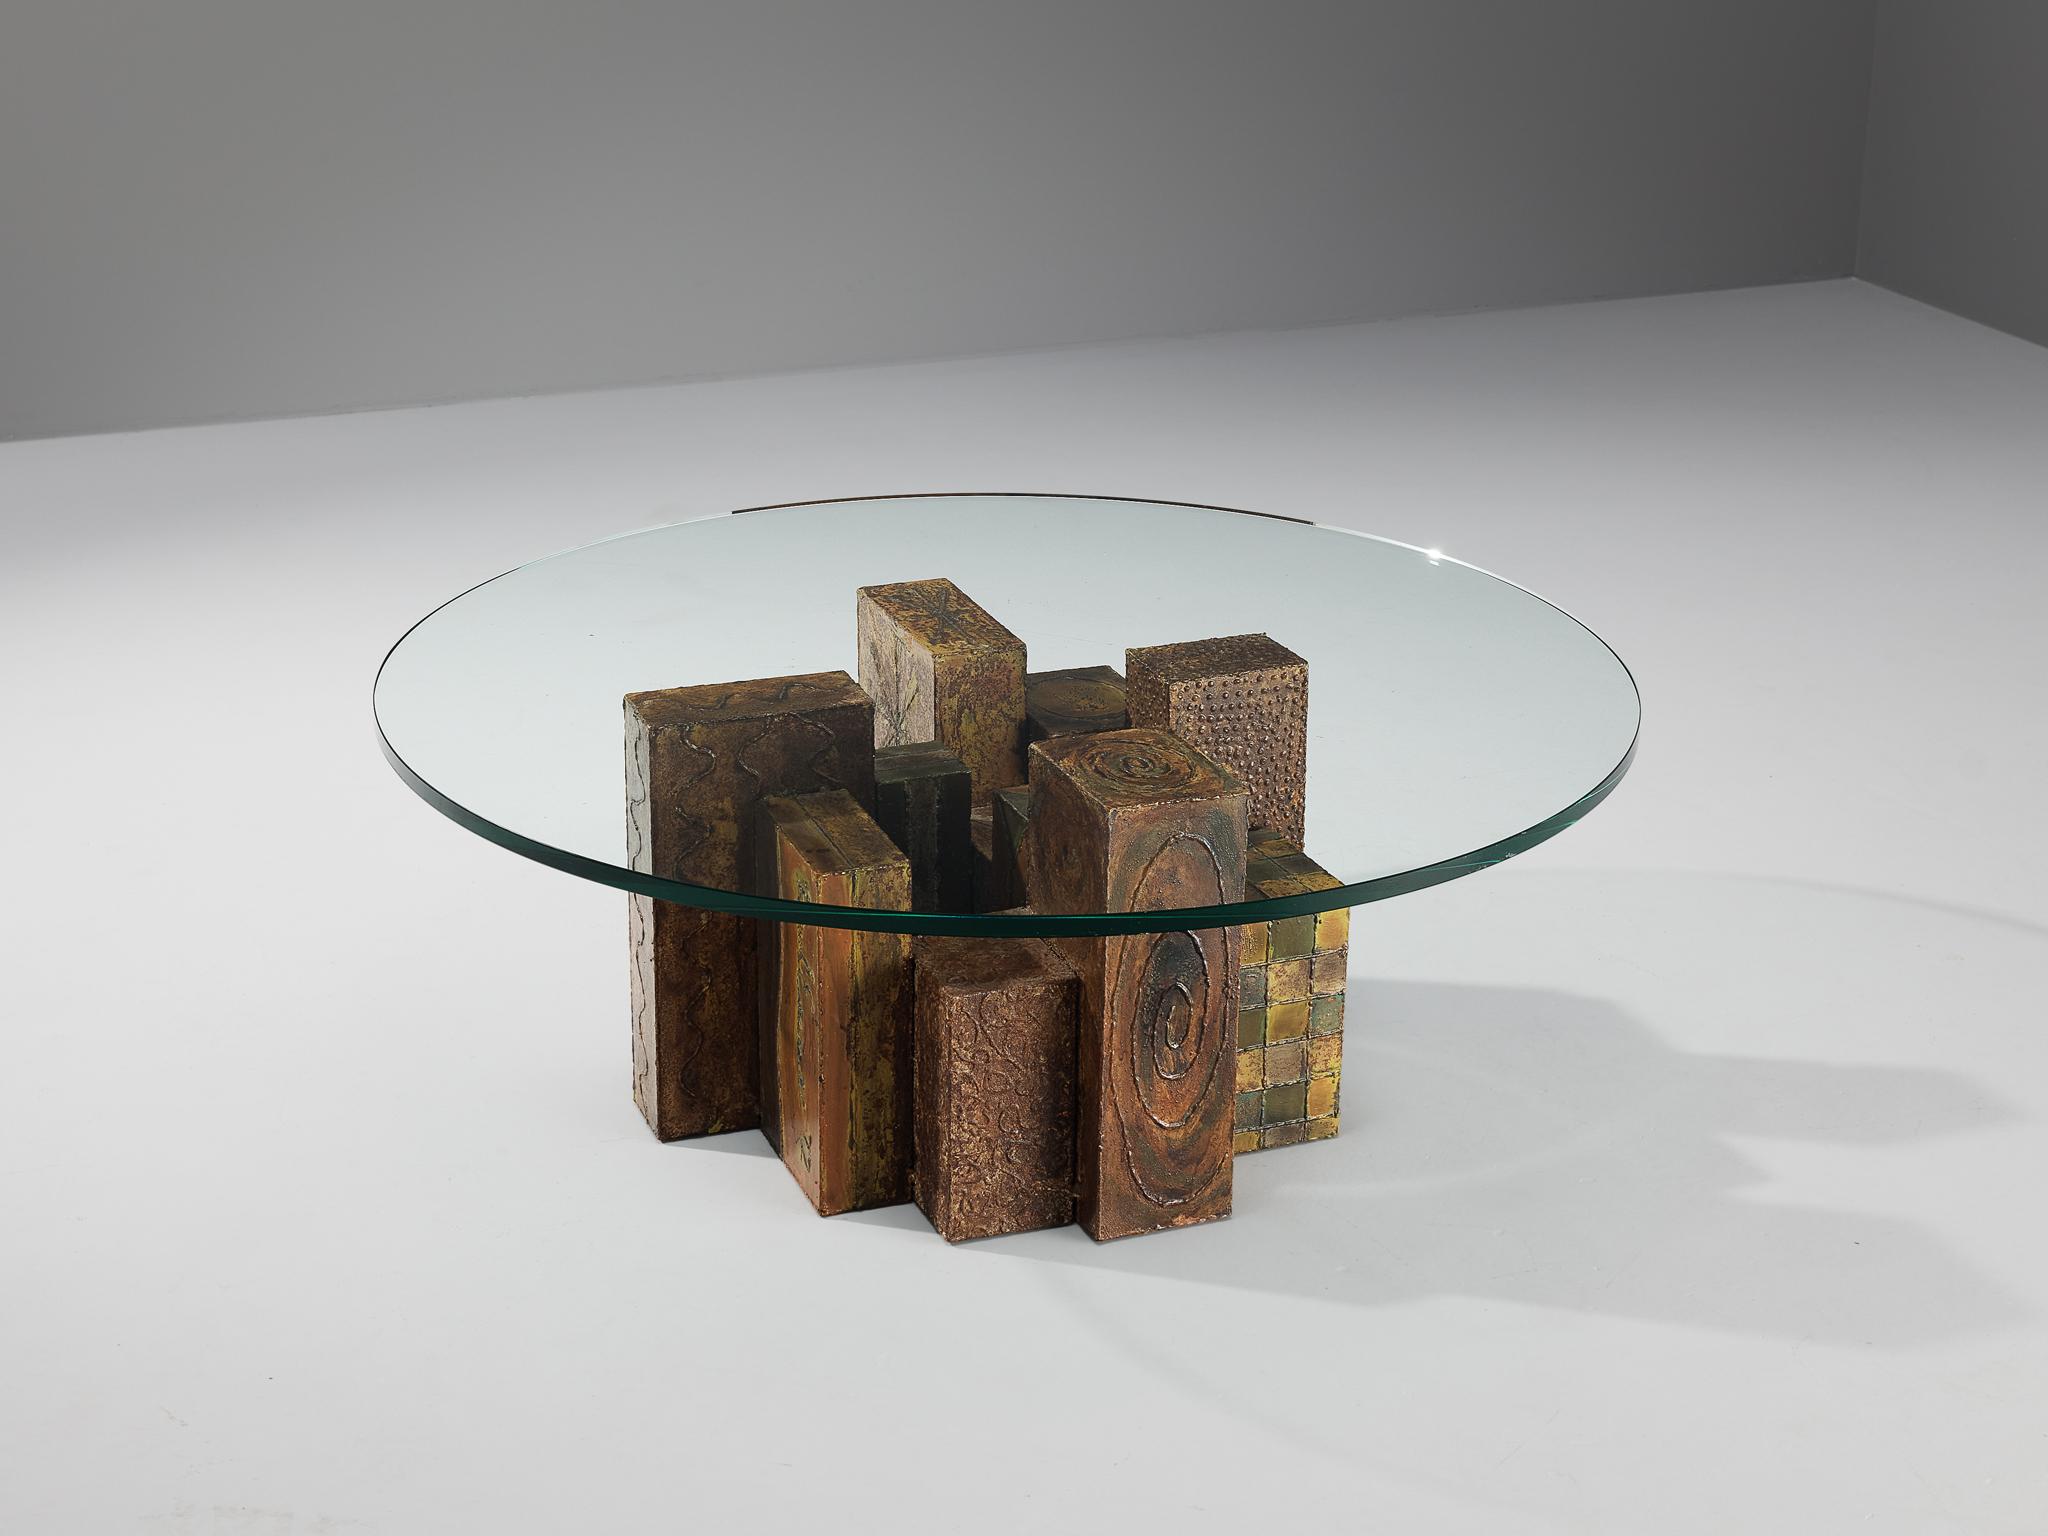 Paul Evans, 'skyline' coffee table, welded and patinated steel, colored pigments, glass, United States, 1972.

Designed by Paul Evans, this unique coffee table is certainly a work of art in its own right. This piece exemplifies Evans’s idiosyncratic